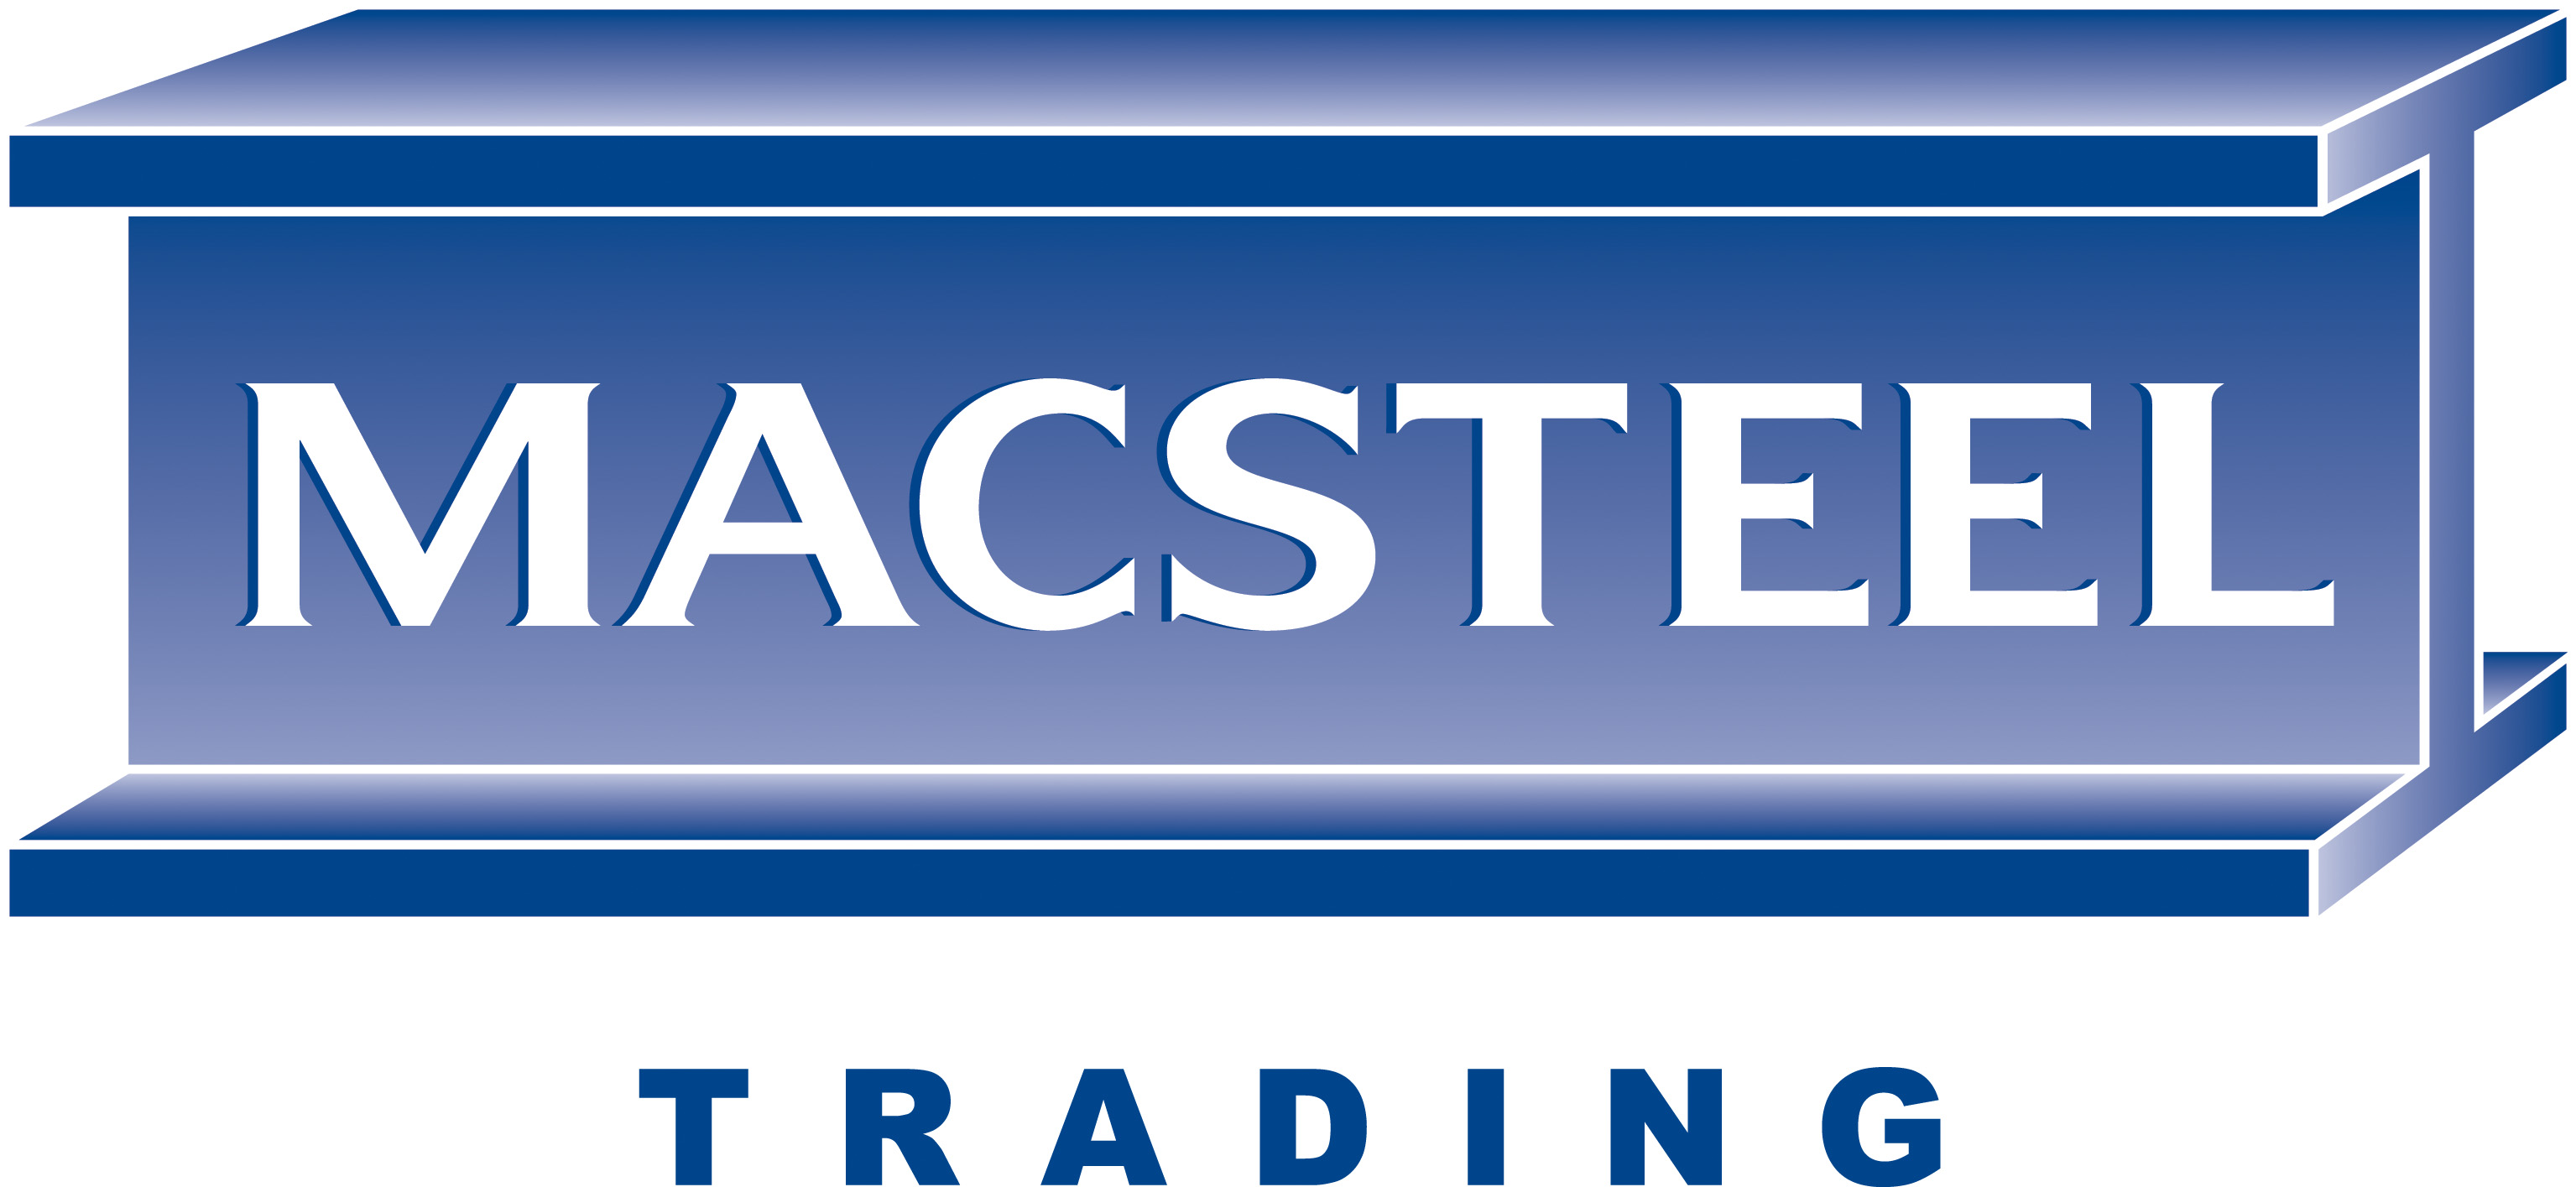 Macsteel Trading - Pipes, Fittings & Flanges logo